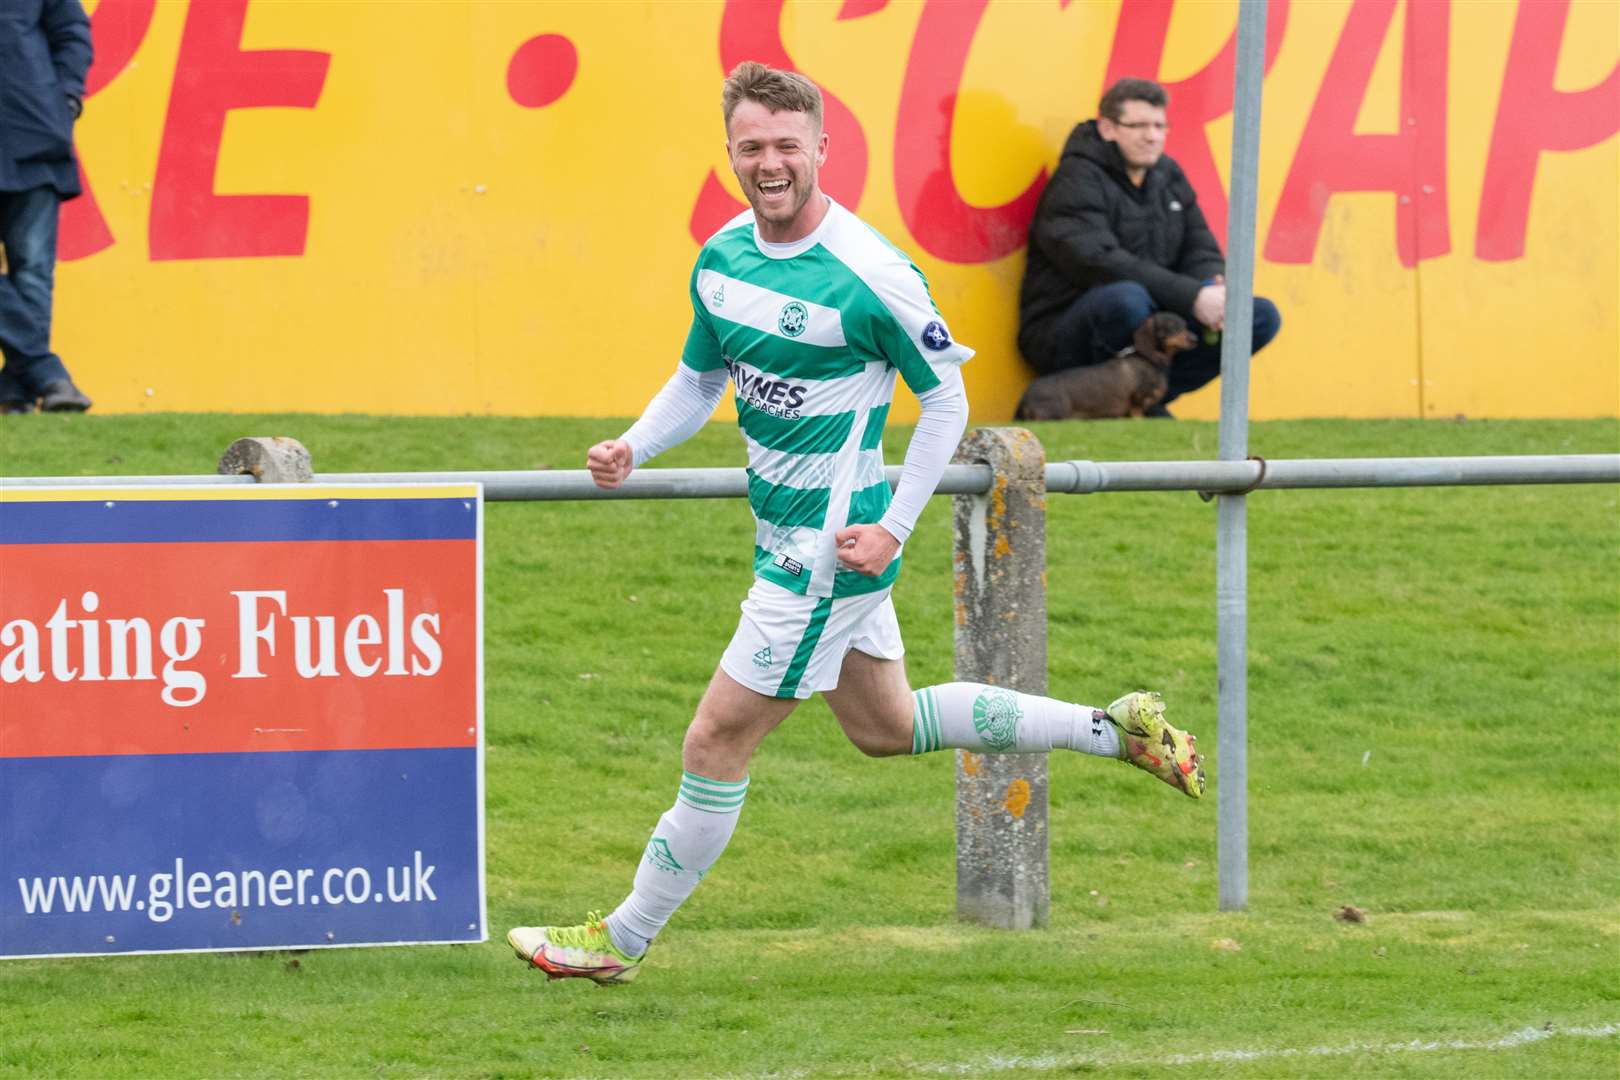 Buckie Thistle's Josh Peters celebrates opens the scoring for the travelling Jags...Forres Mechanics FC (2) vs Buckie Thistle FC (3) - Highland Football League 22/23 - Mosset Park, Forres 01/04/23...Picture: Daniel Forsyth..